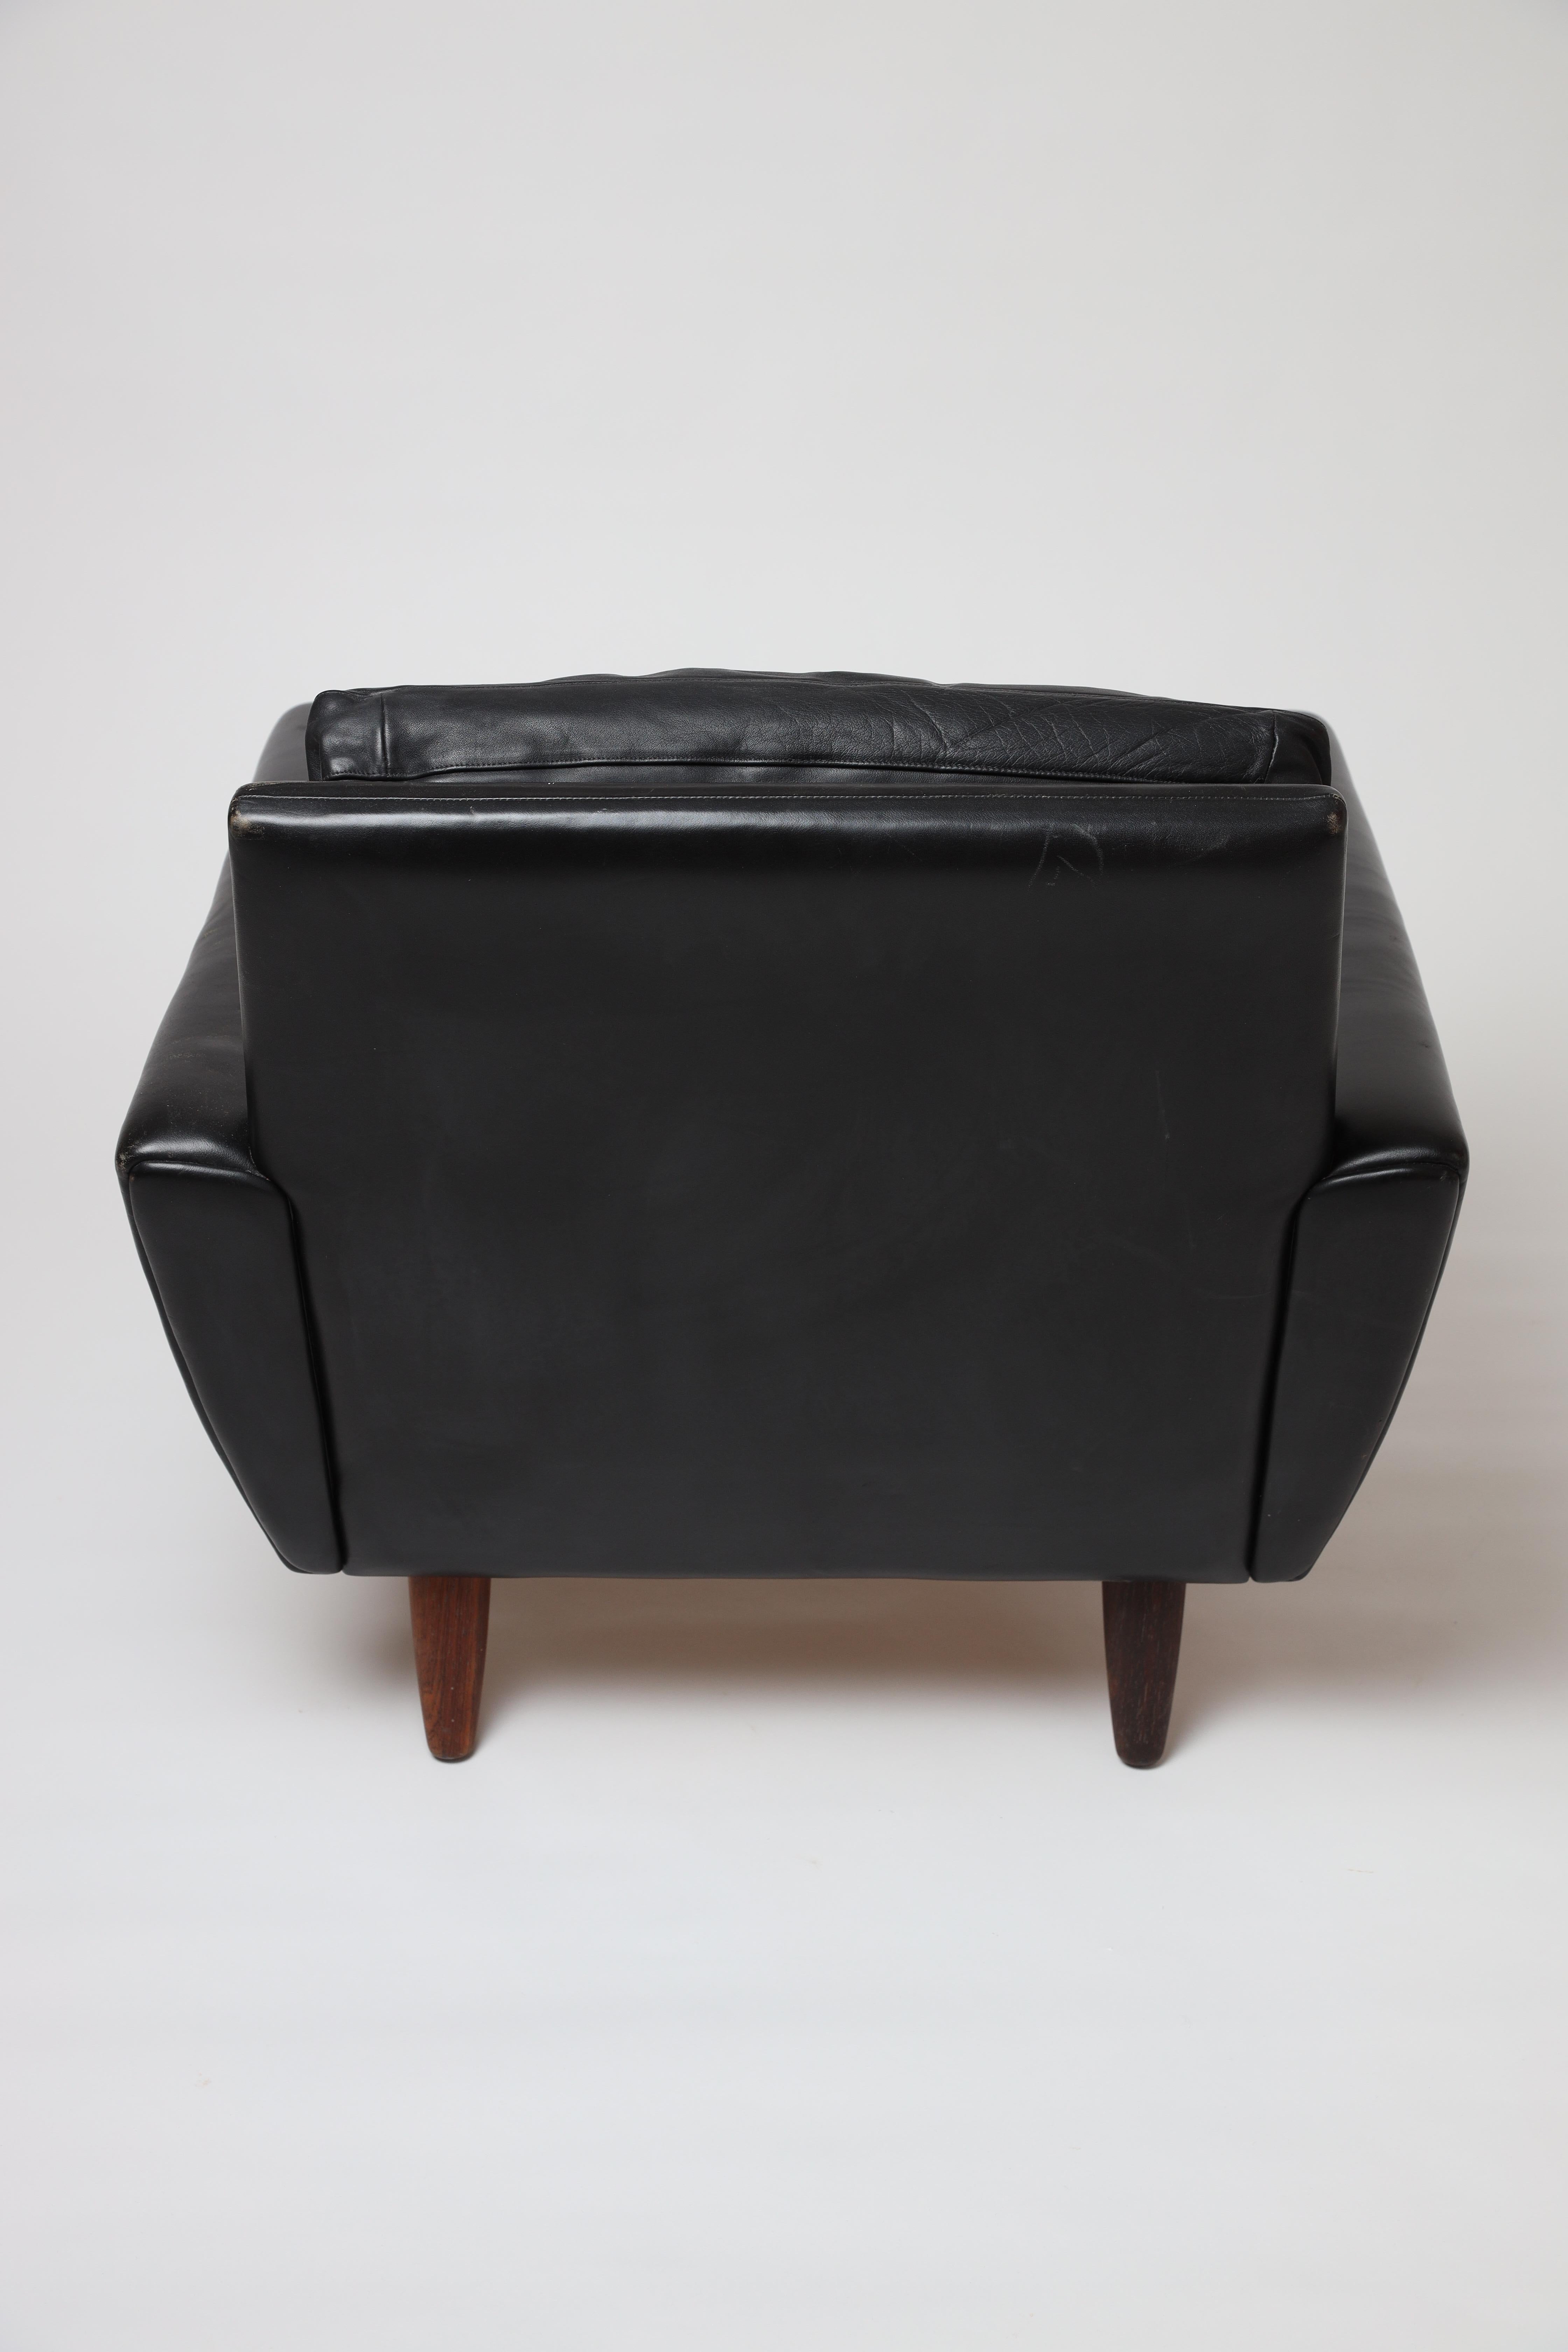 Danish Modern Easy Chair by Georg Thams in Black Leather and Rosewood Legs, 1964 1